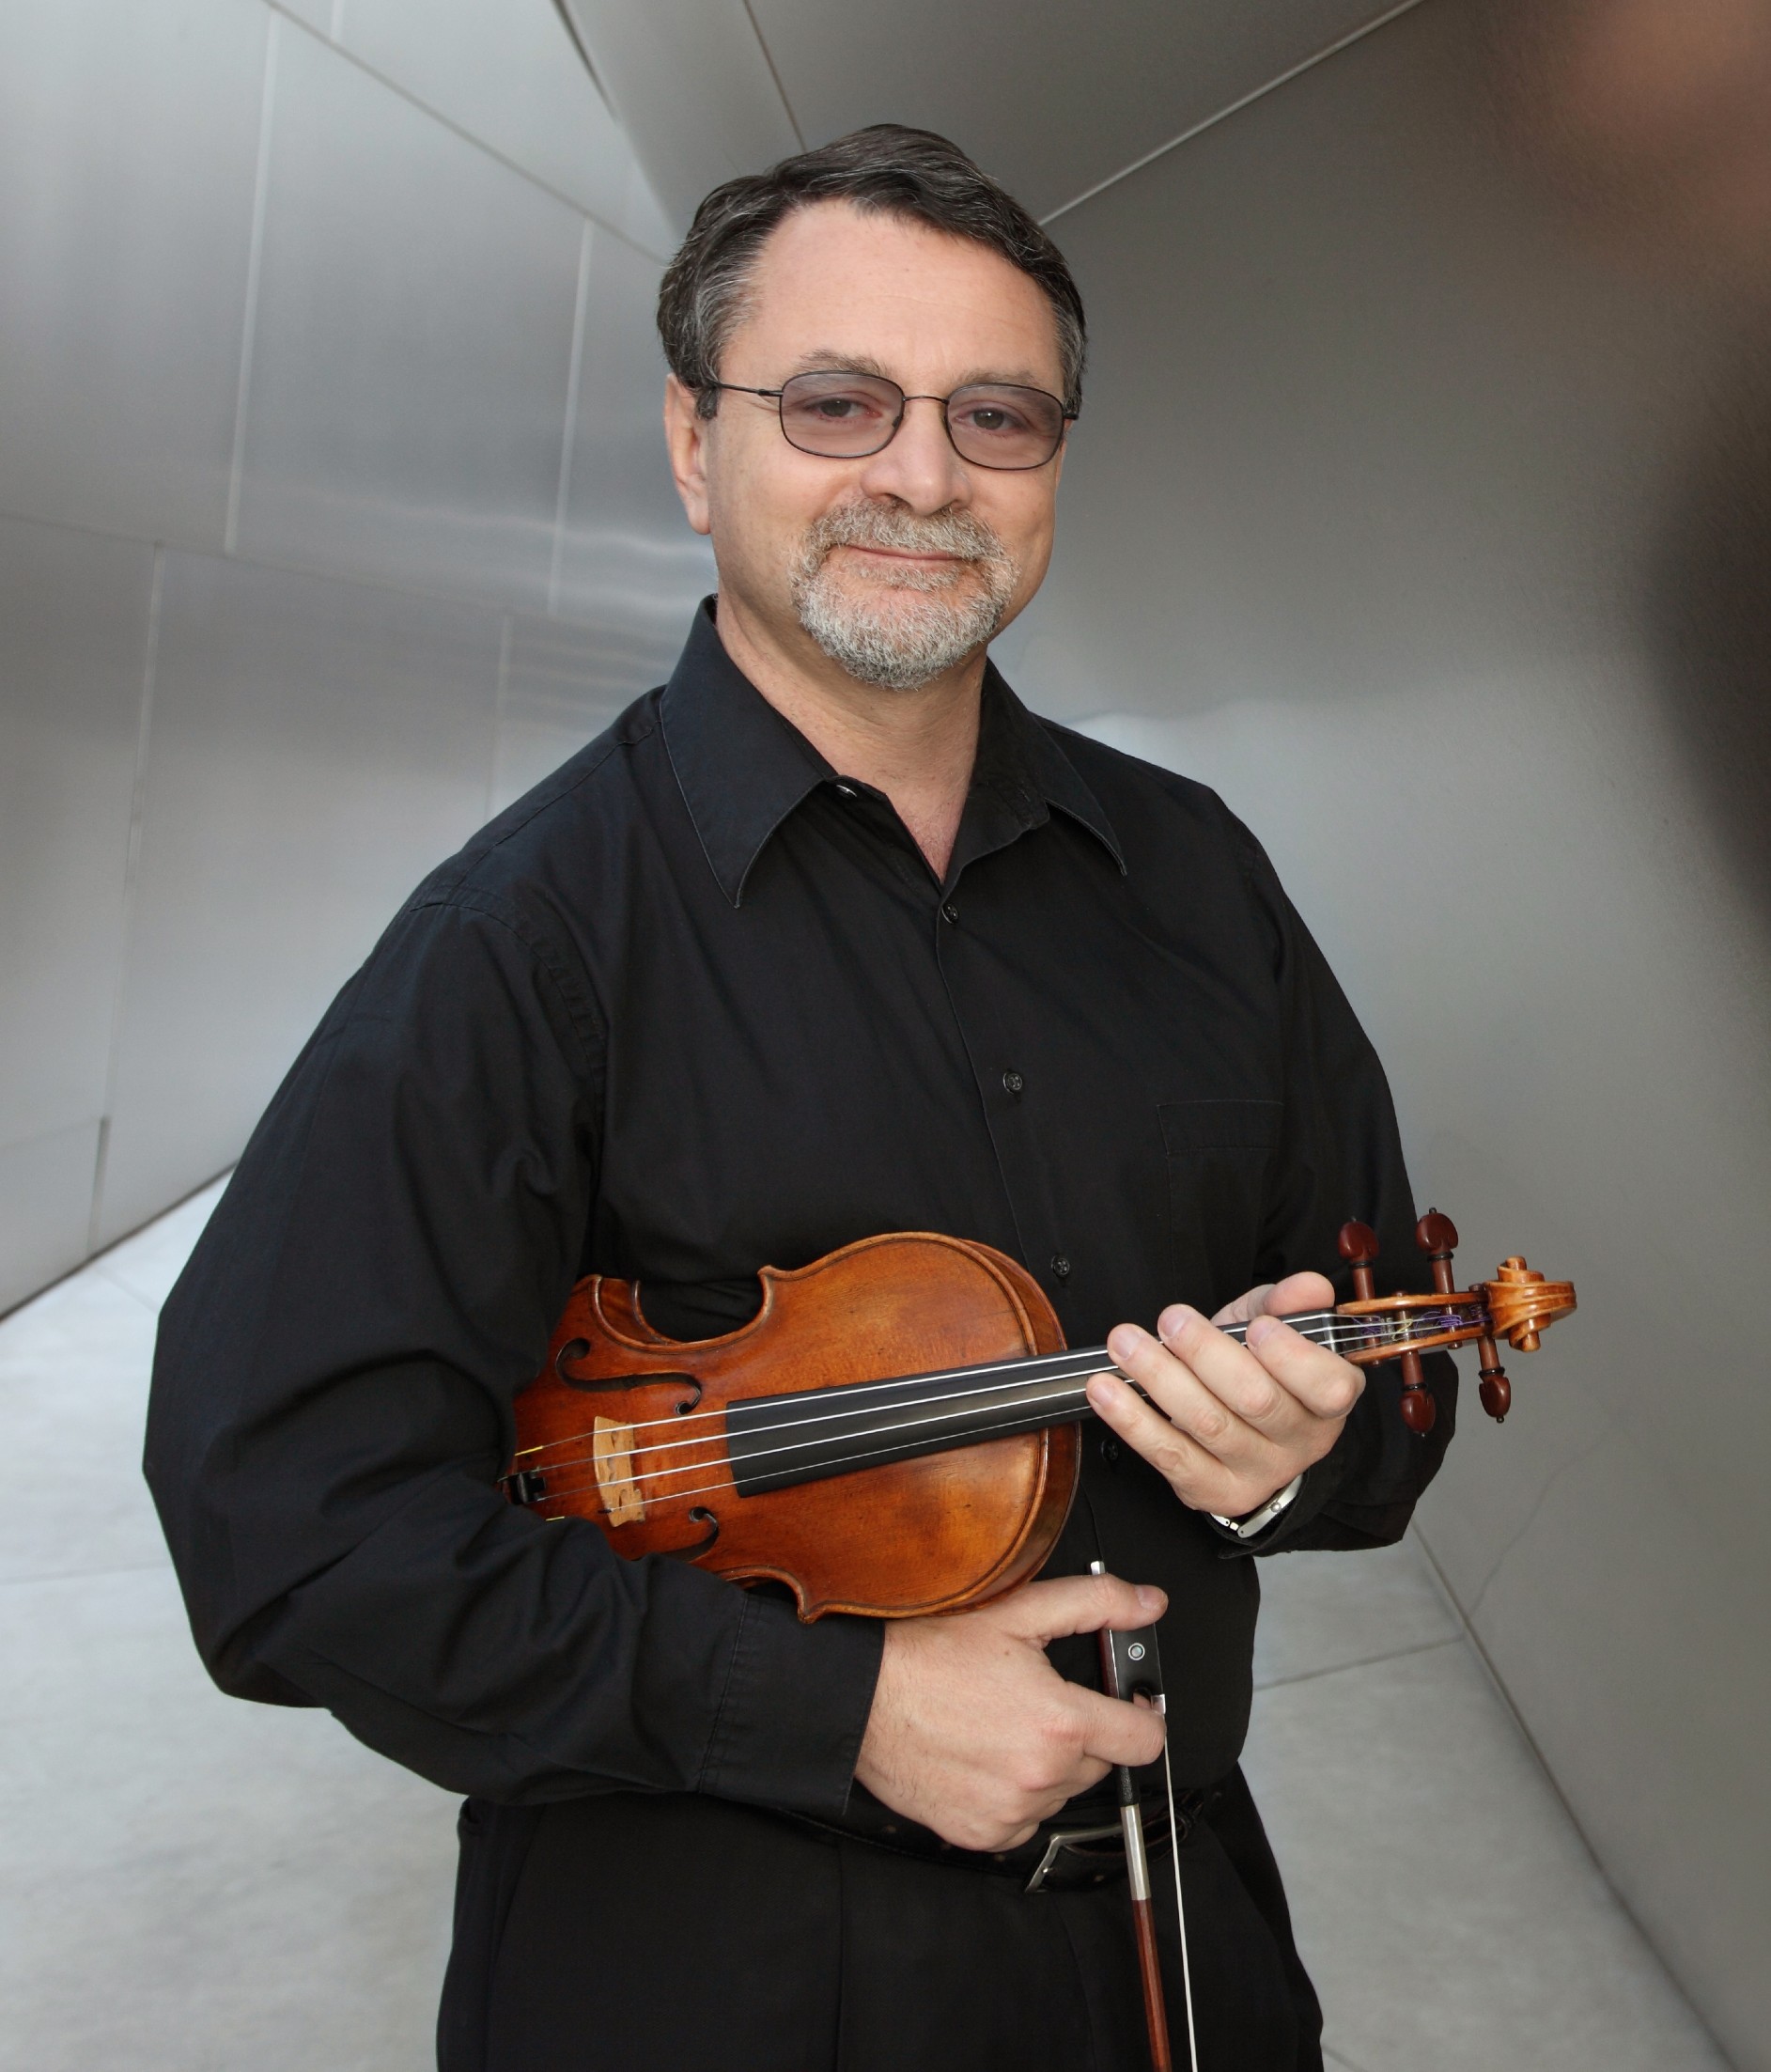 Cantor Ilan Davidson at with the LAJS at the Kindred Spirits 2014 concert at Walt Disney Concert Hall.